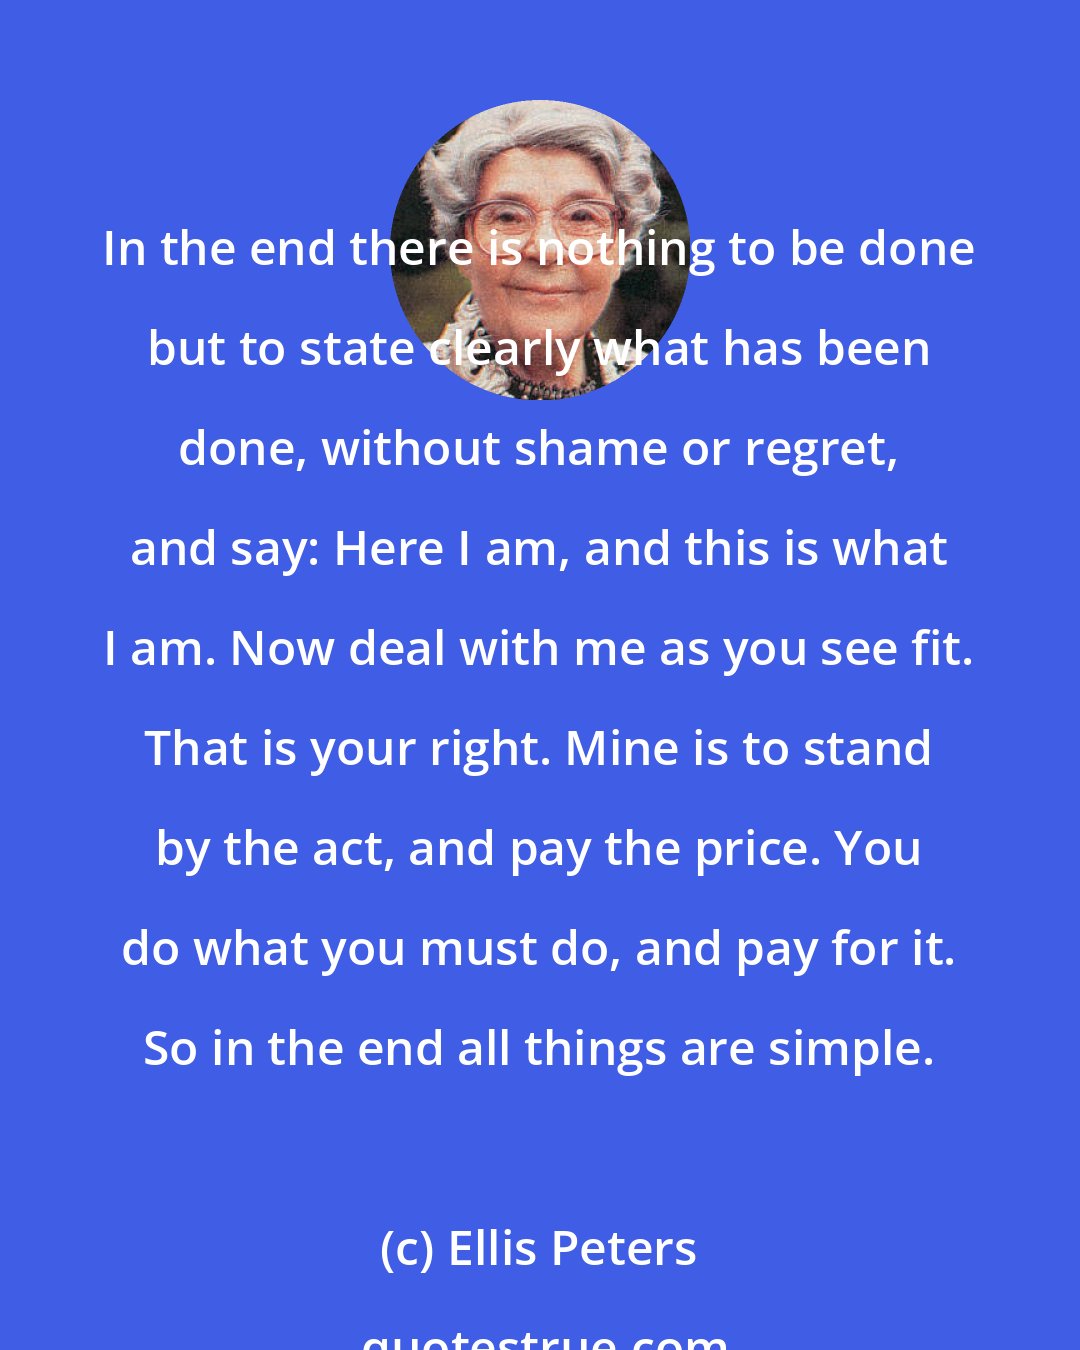 Ellis Peters: In the end there is nothing to be done but to state clearly what has been done, without shame or regret, and say: Here I am, and this is what I am. Now deal with me as you see fit. That is your right. Mine is to stand by the act, and pay the price. You do what you must do, and pay for it. So in the end all things are simple.